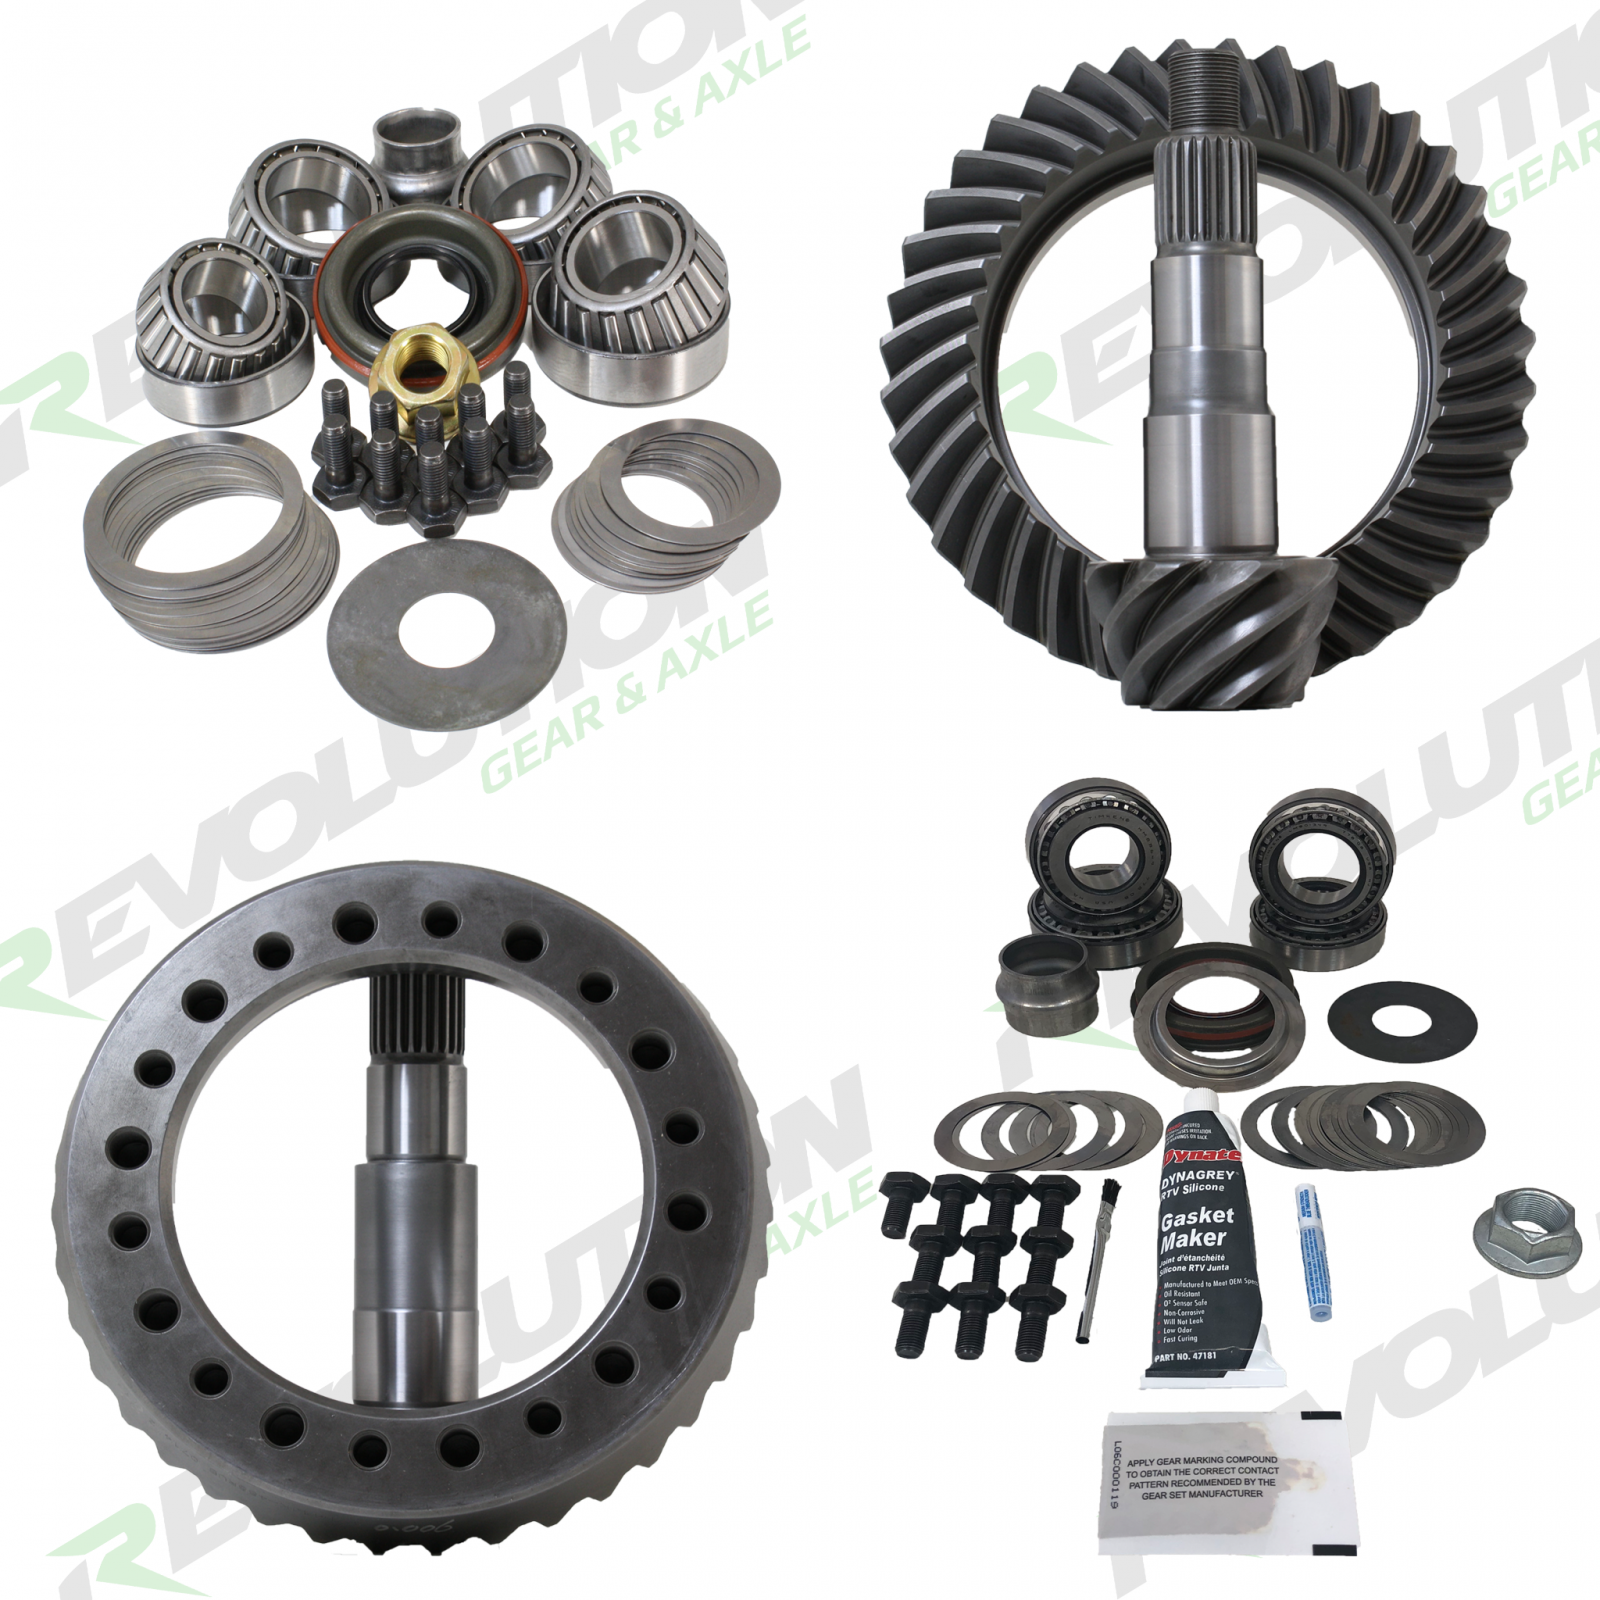 Revolution Gear & Axle Front And Rear Gear Package With Timken Bearings, Dana 44 Thick, 4.88 Ratio